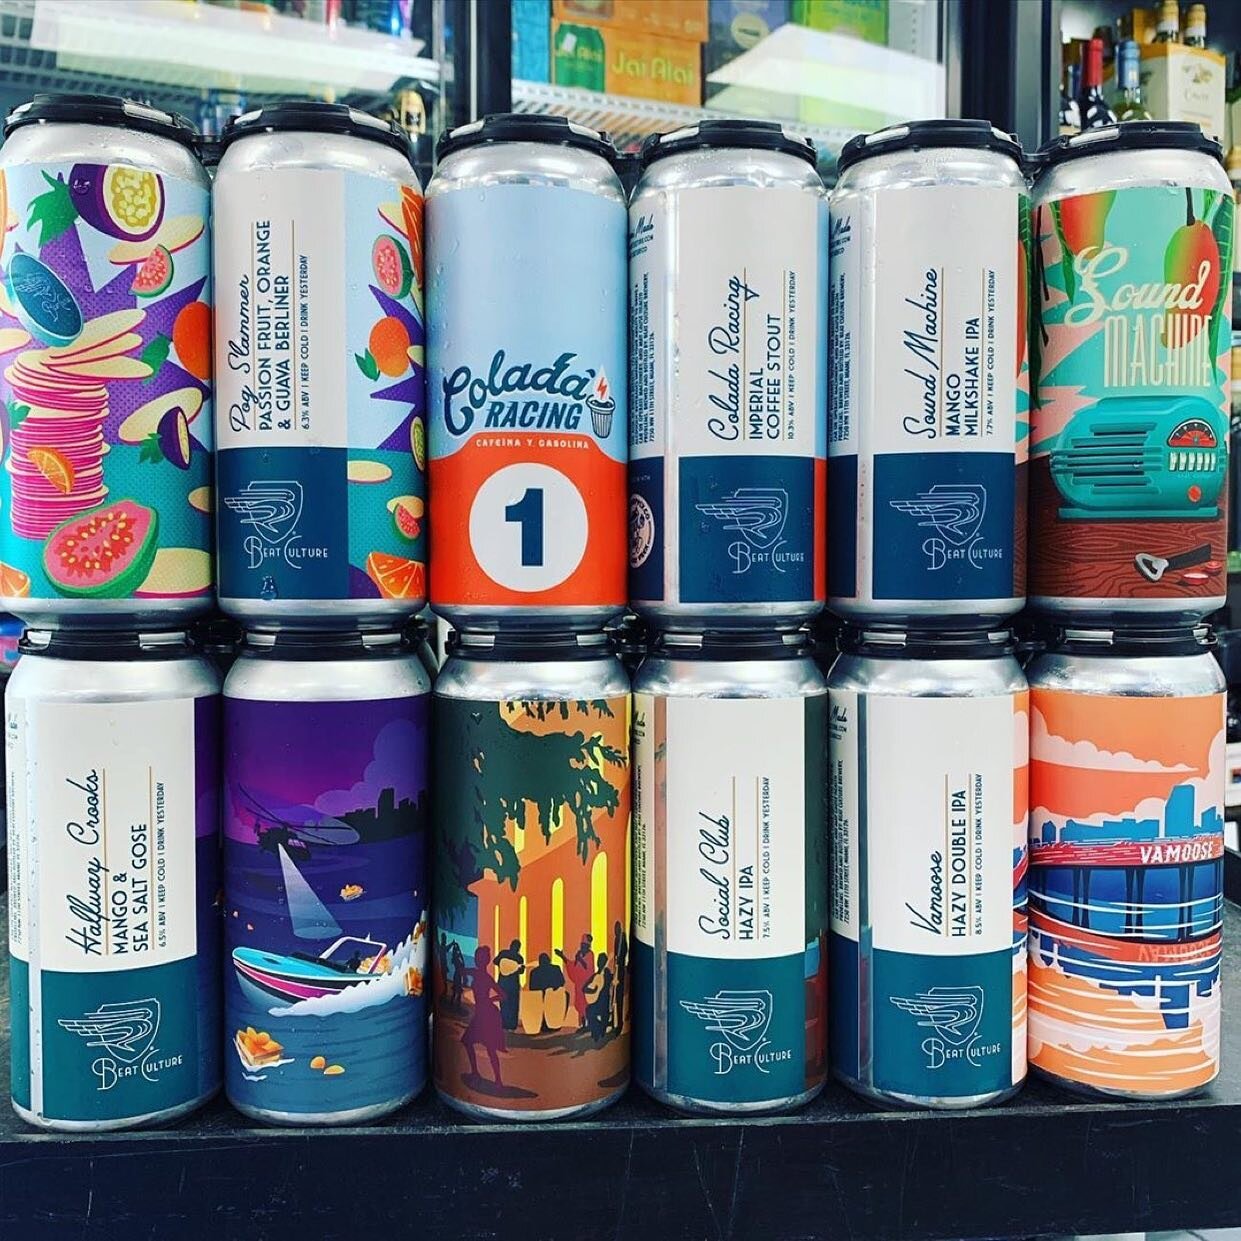 Kendall...we got you covered!⁣
⁣
@west_dade_craft_beers has Beat Culture beers stocked up at both Chevon locations... ⁣
⁣
-  107 ave &amp; Kendall Drive⁣
-  157 ave &amp; Kendall Drive ⁣
⁣
Not your usual gas station. We love those guys!⁣ Make sure to